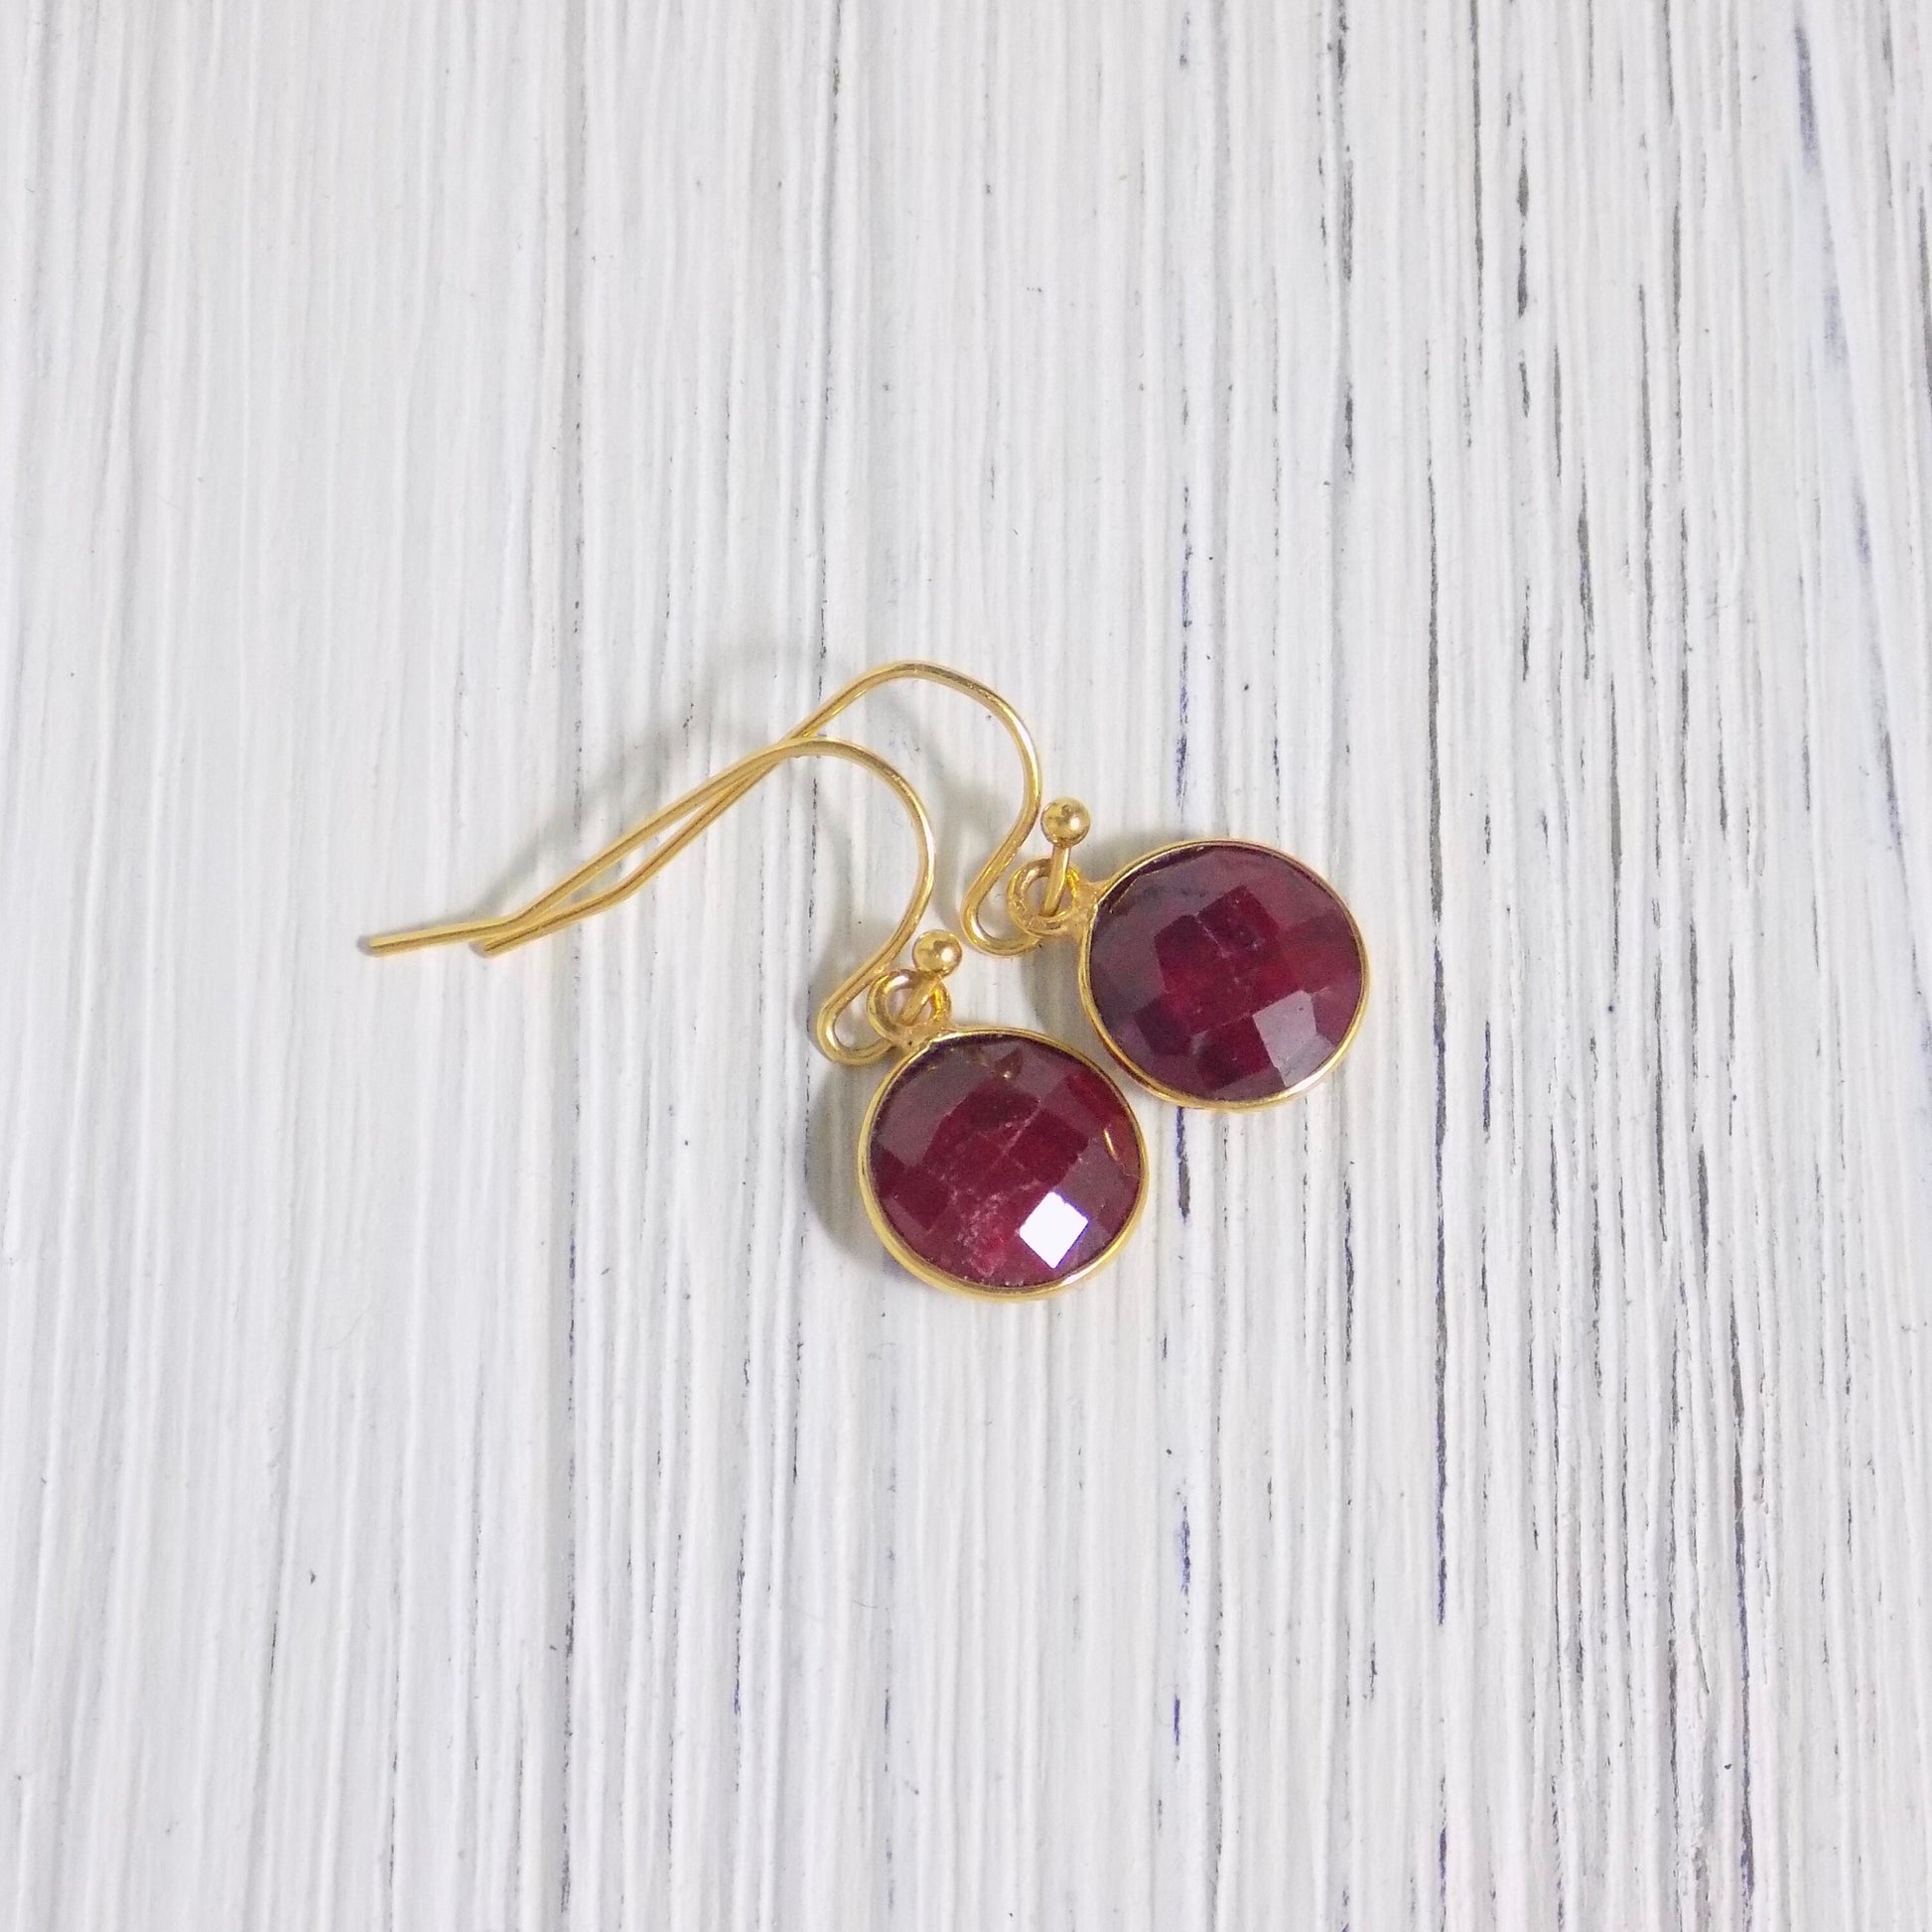 Small Raw Ruby Drop Earrings Gold, Natural Gemstone Jewelry Gifts For Women, M4-96